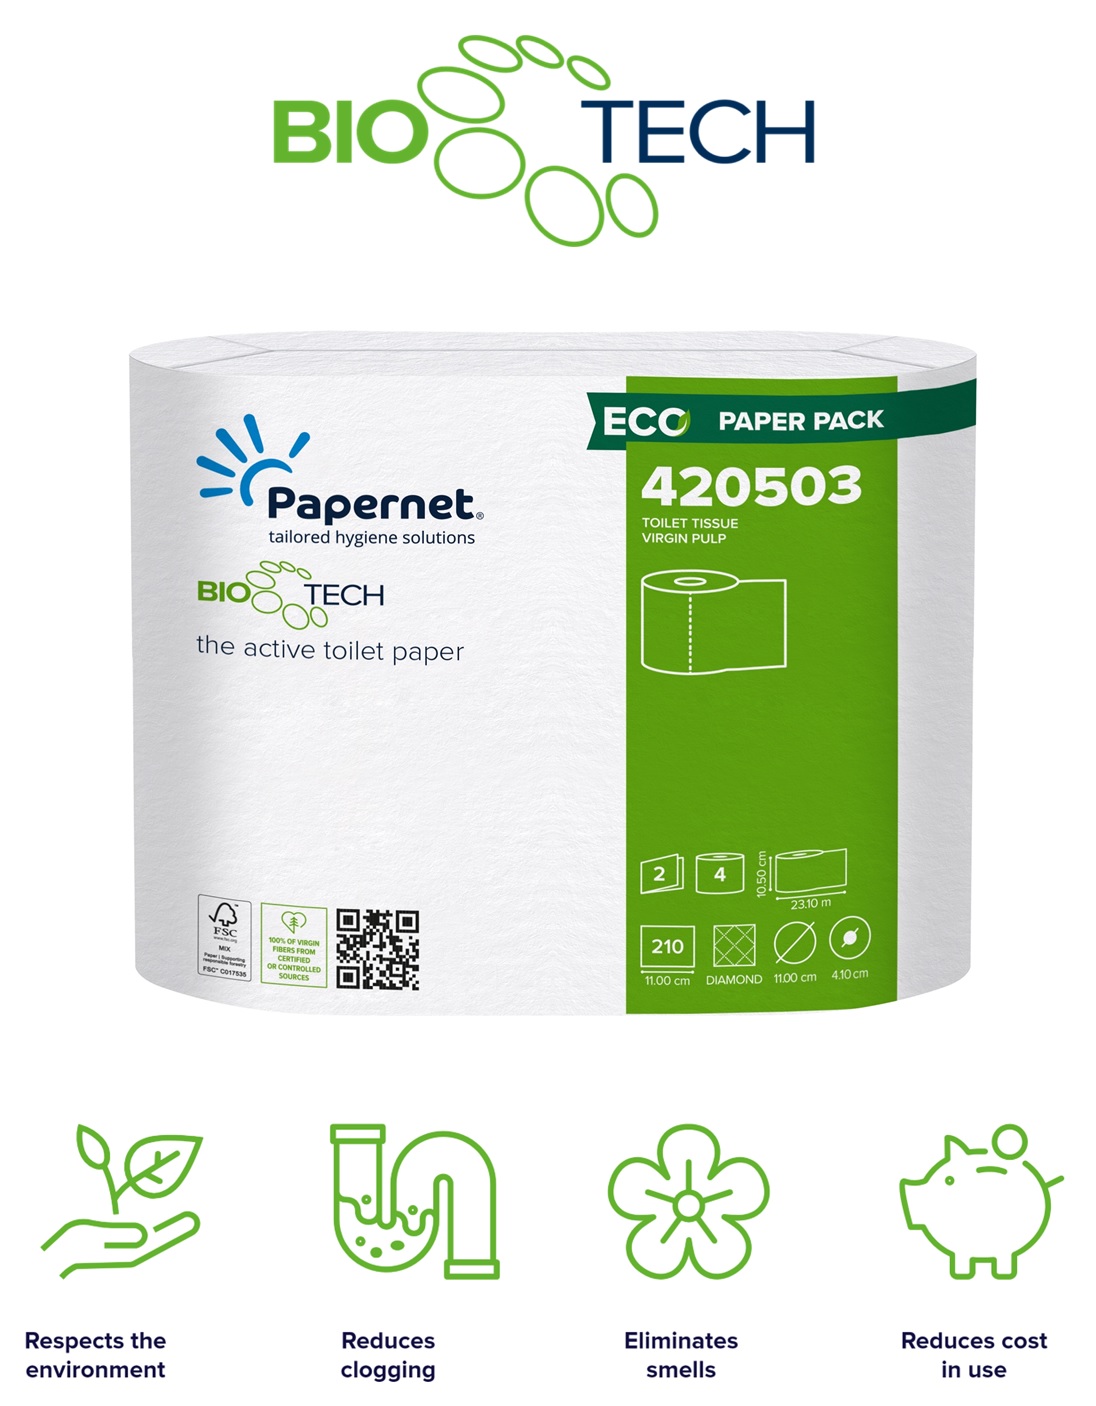 Papernet Bio Tech 420503 Toilet Roll.

BIO TECH is the active toilet paper that combats bacteria and cleans the pipes in your restrooms.